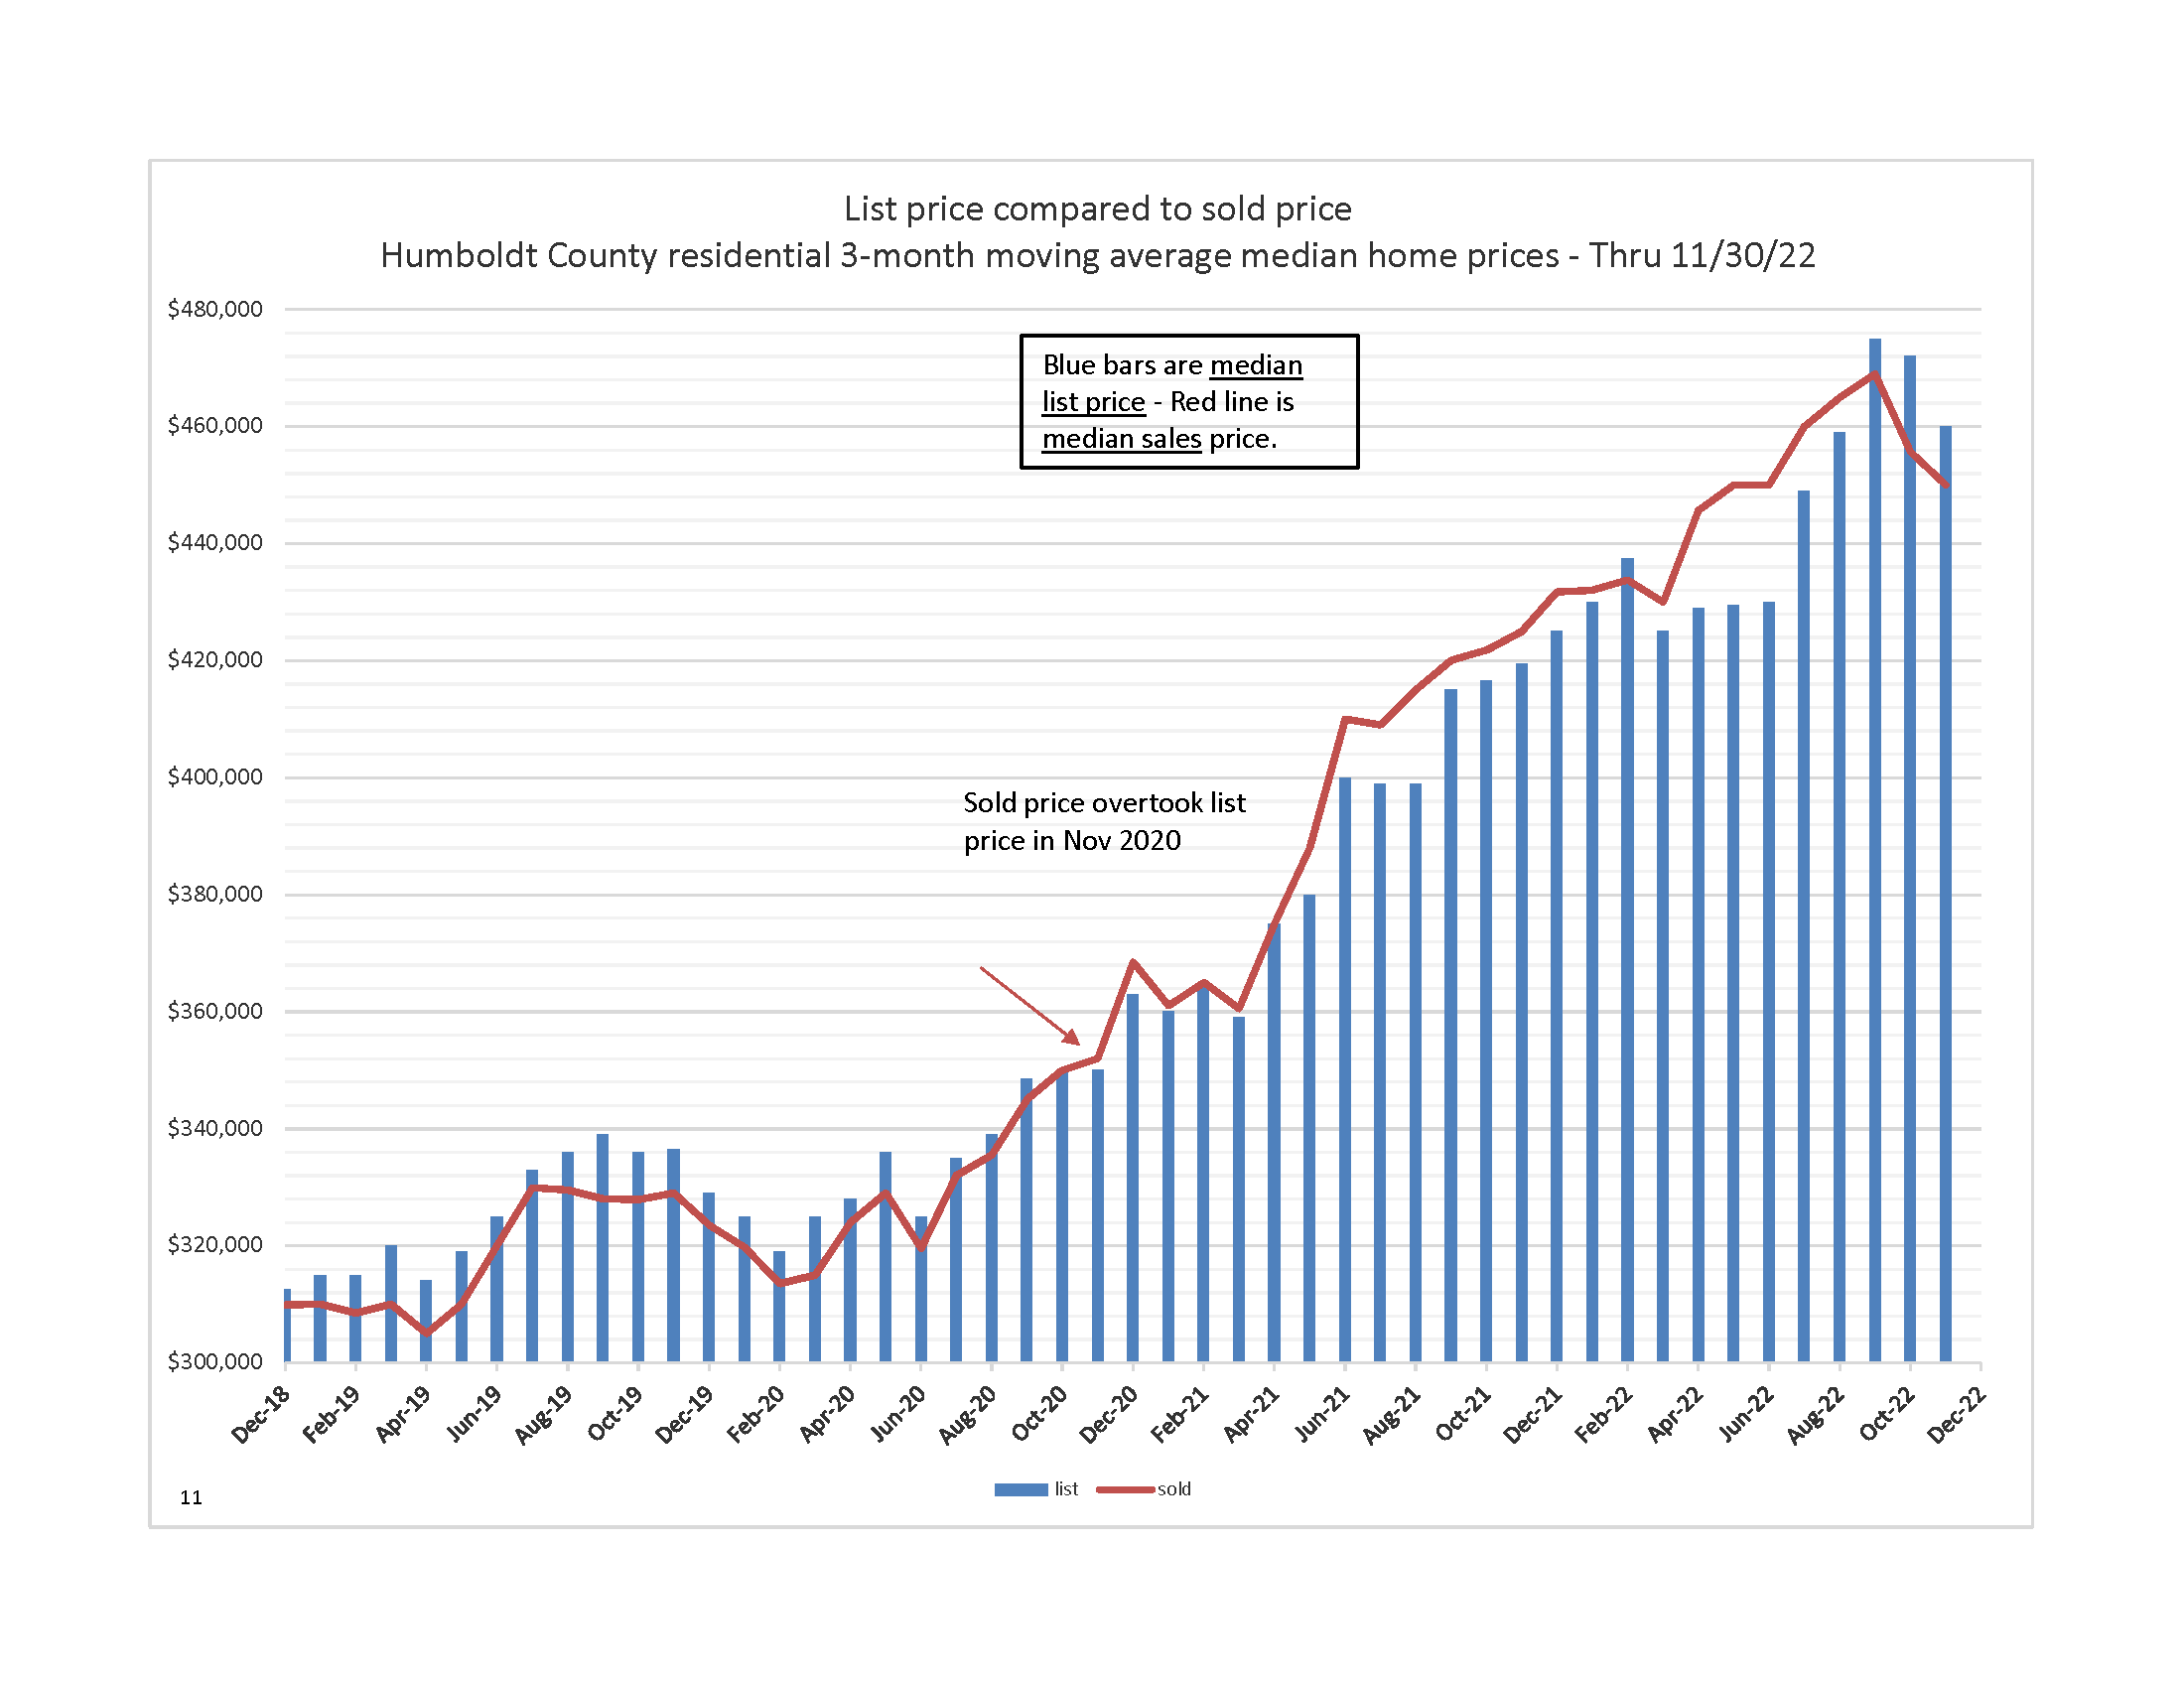 graph, compare list price and sold price, recent downward trend